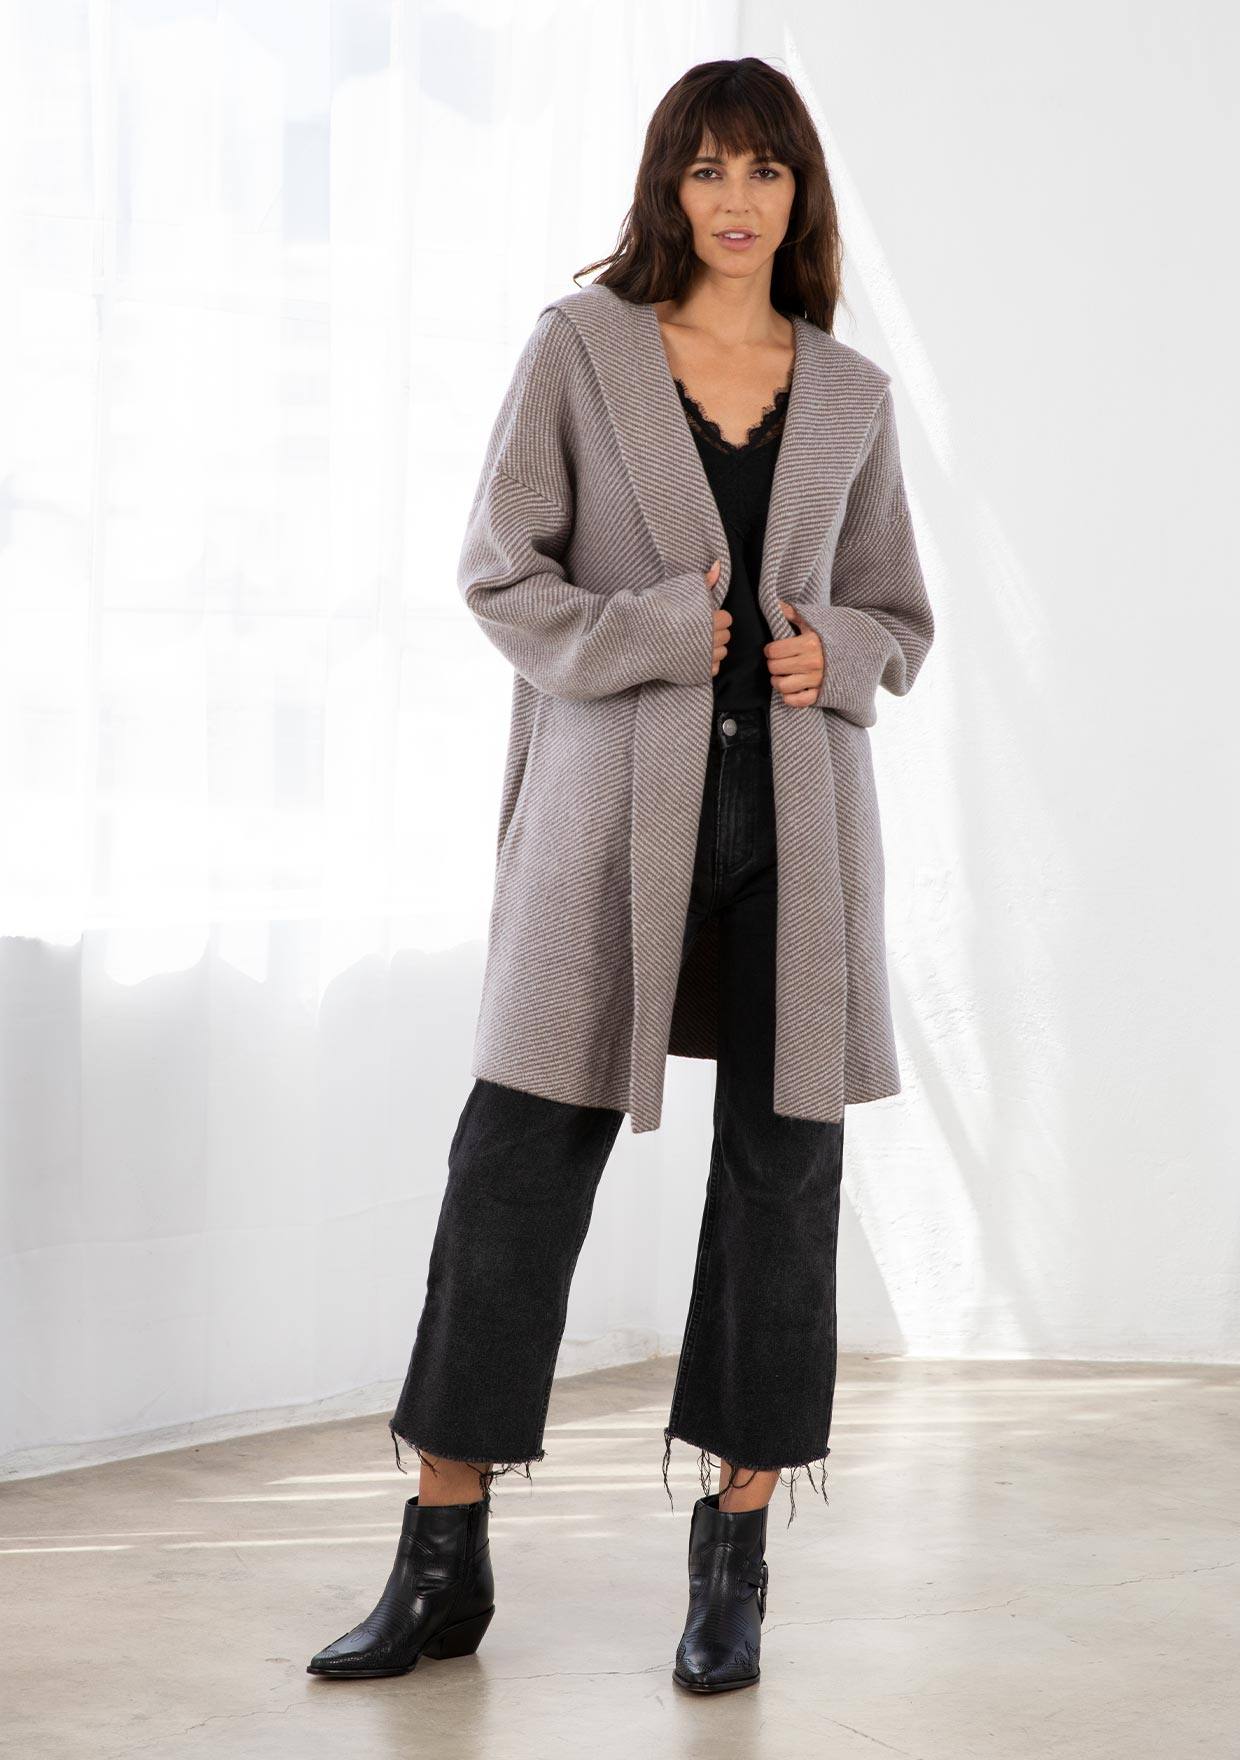 [Color: Mocha/Grey] A model wearing a cozy mocha brown oversize mid length cardigan. With side pockets, an open front, a shawl collar, and a hoodie. 